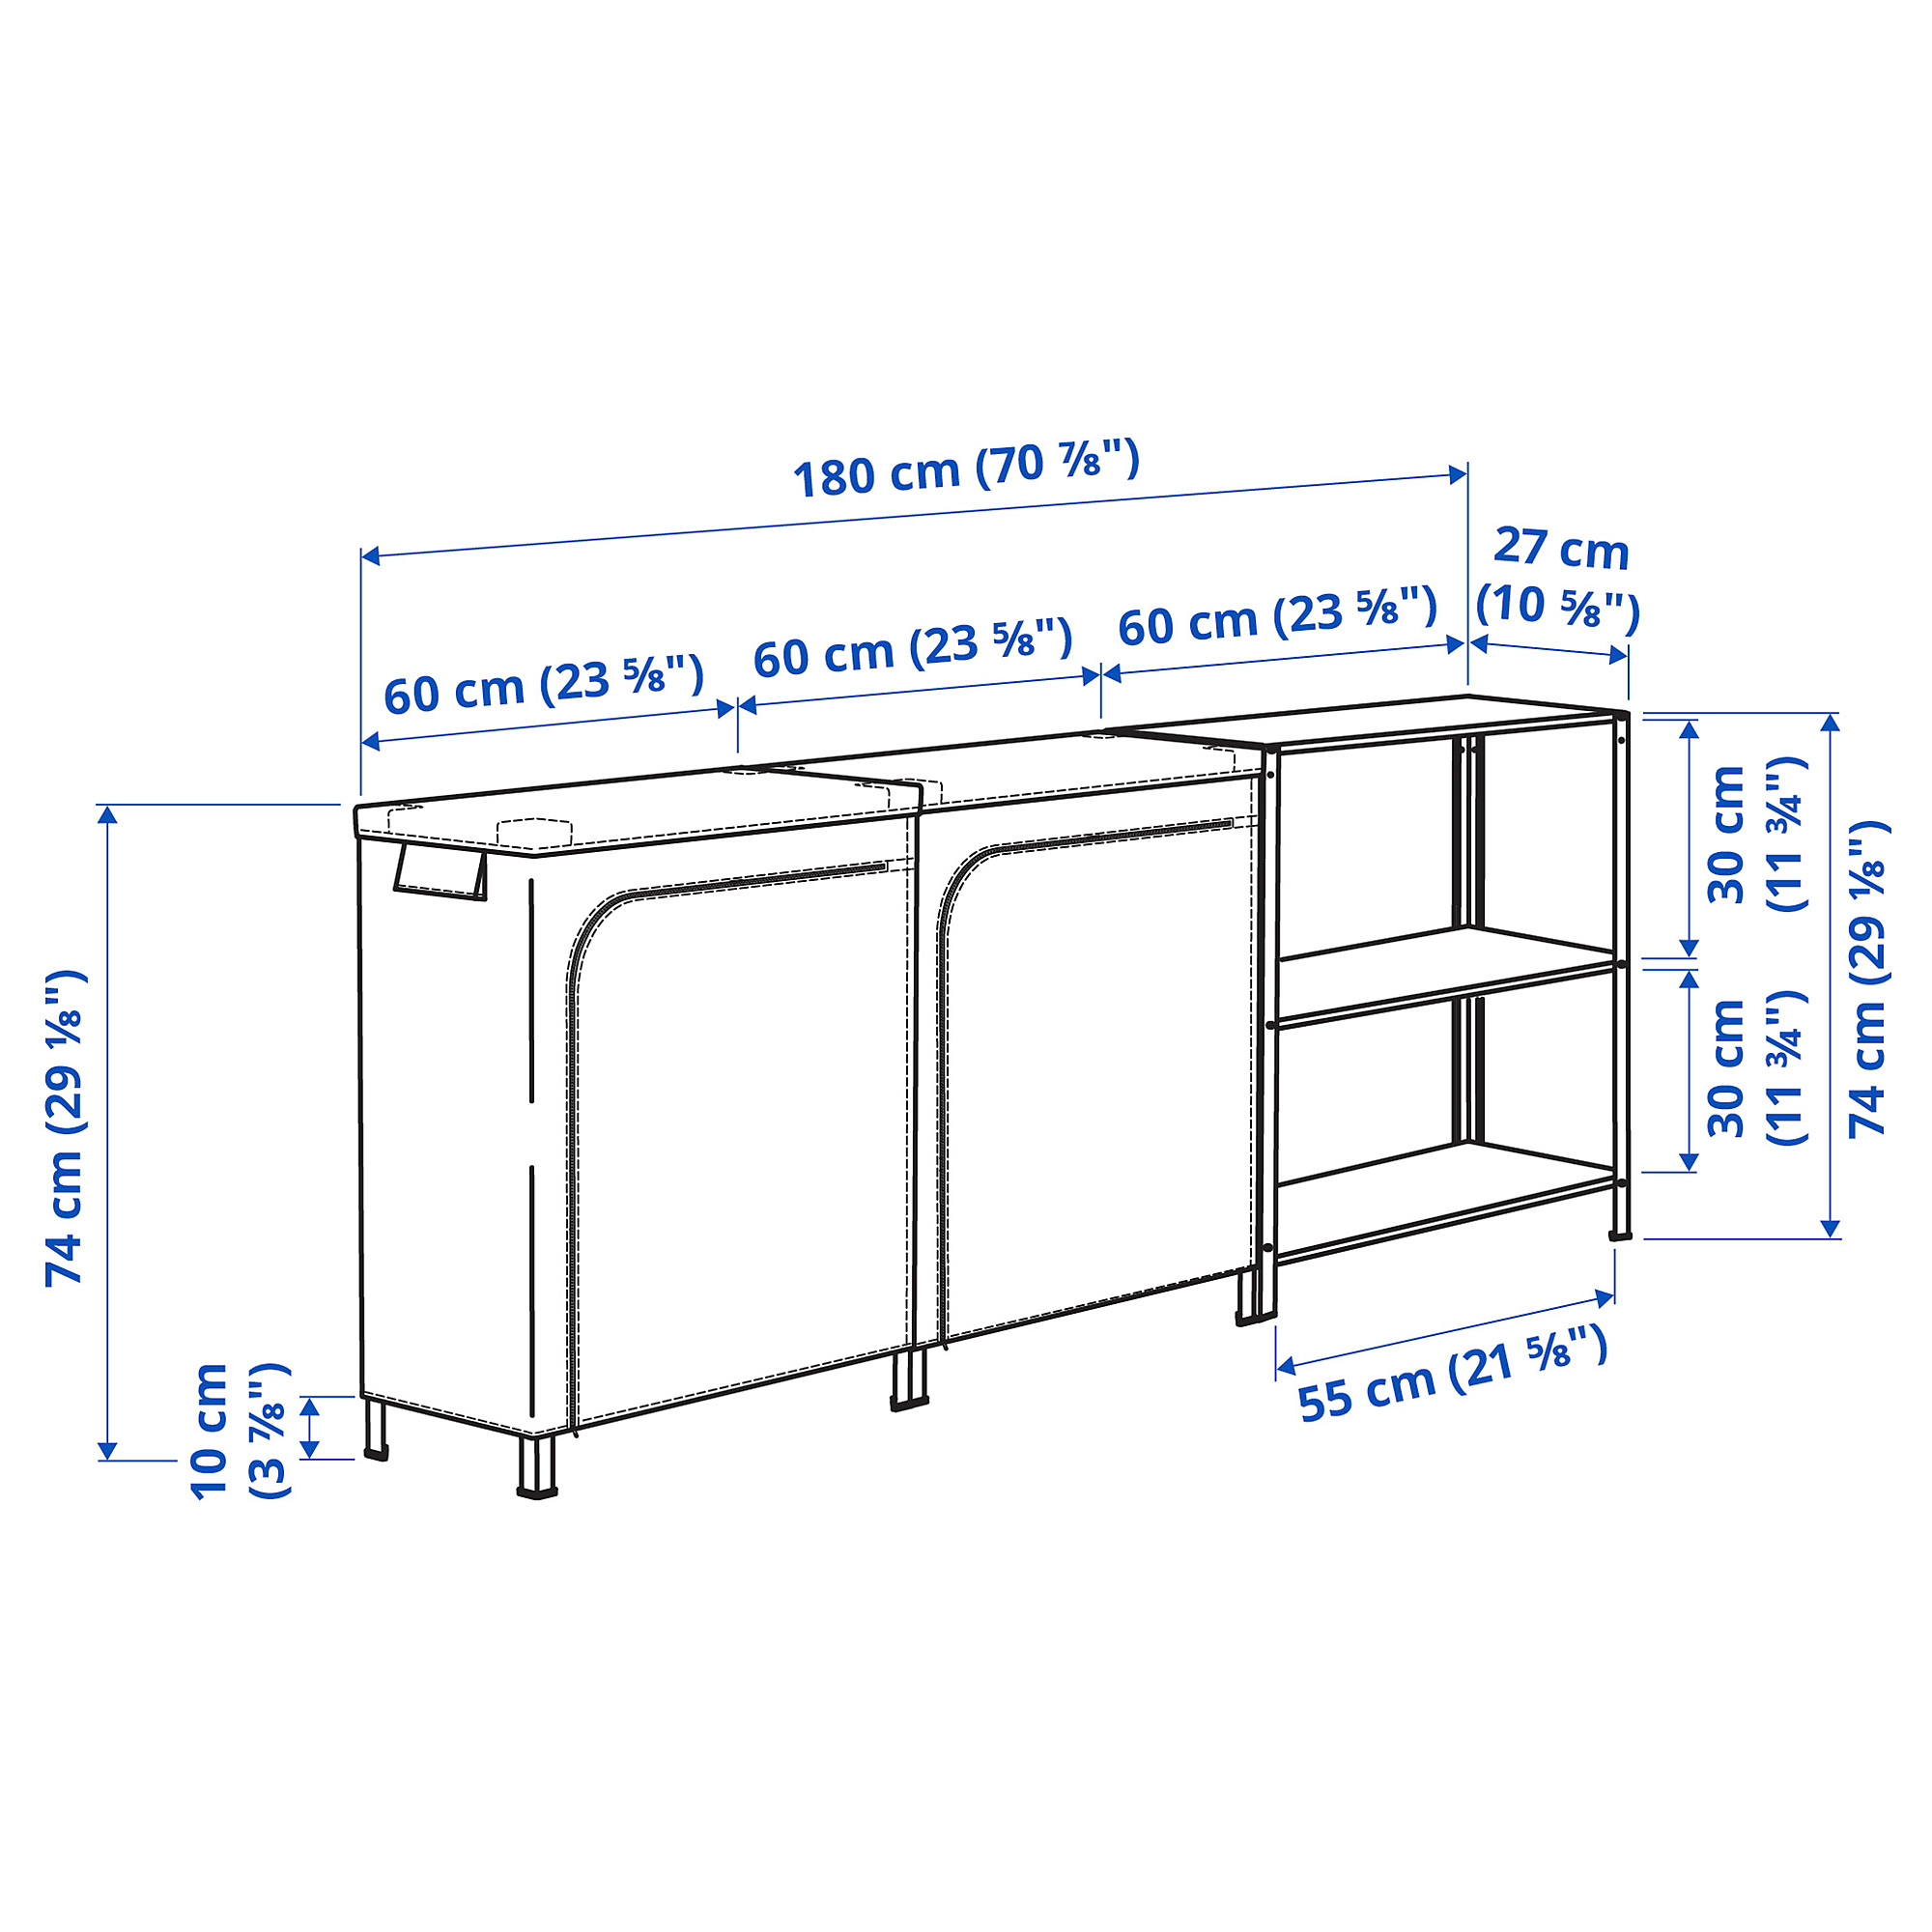 HYLLIS shelving units with covers